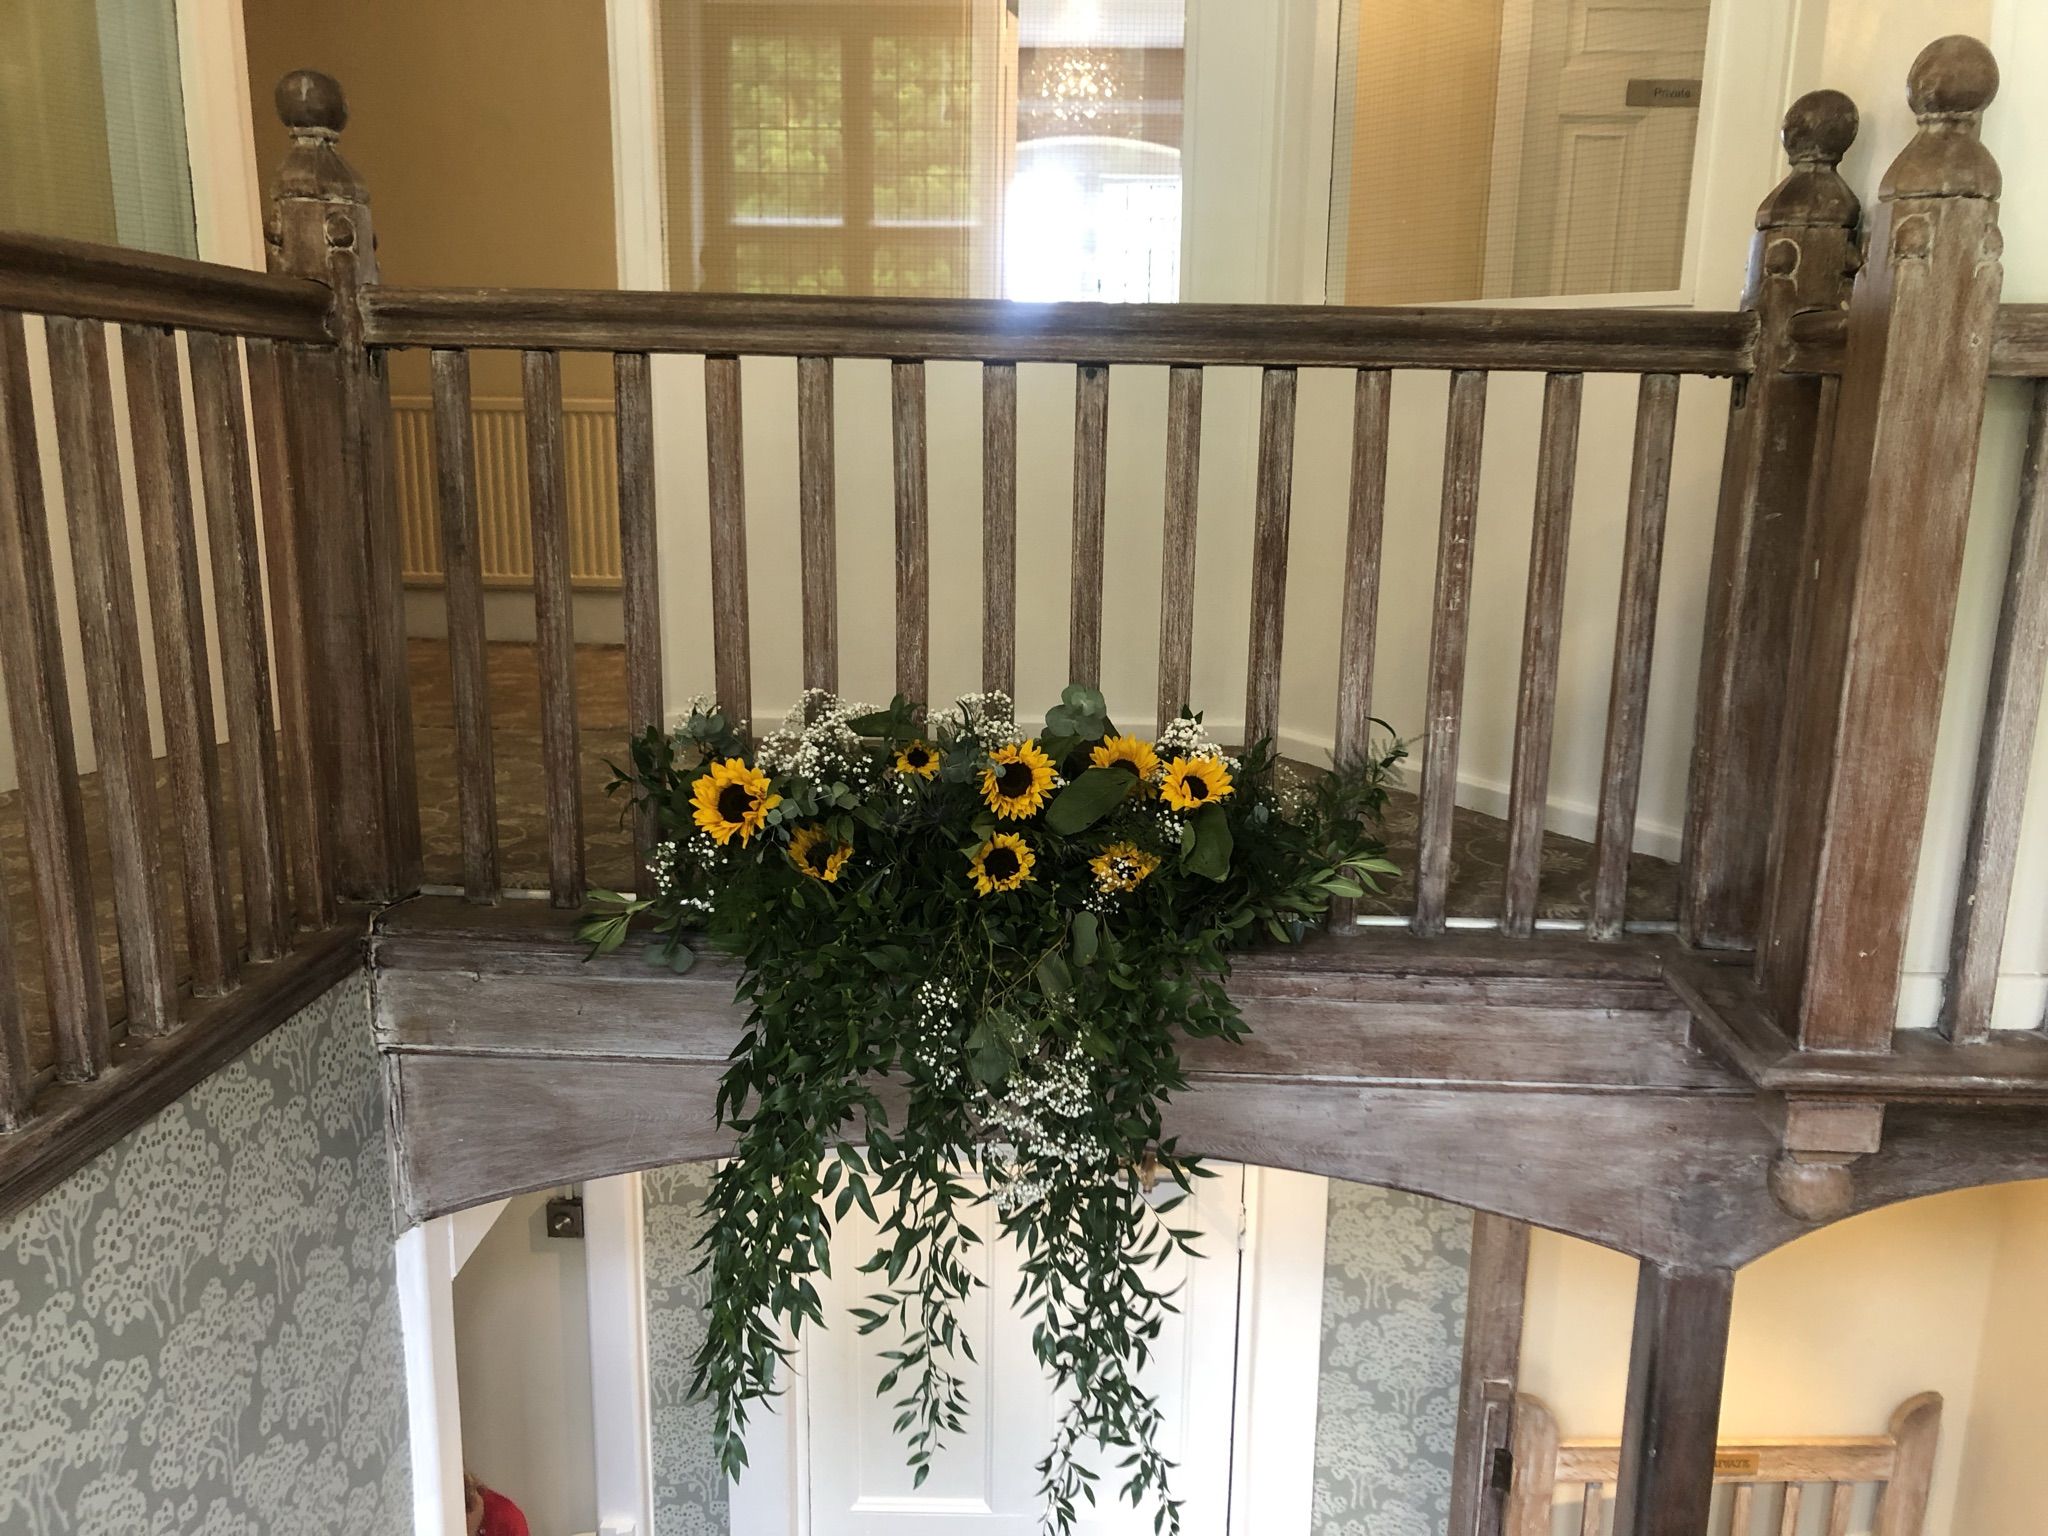 a bunch of sunflowers are hanging from a railing.